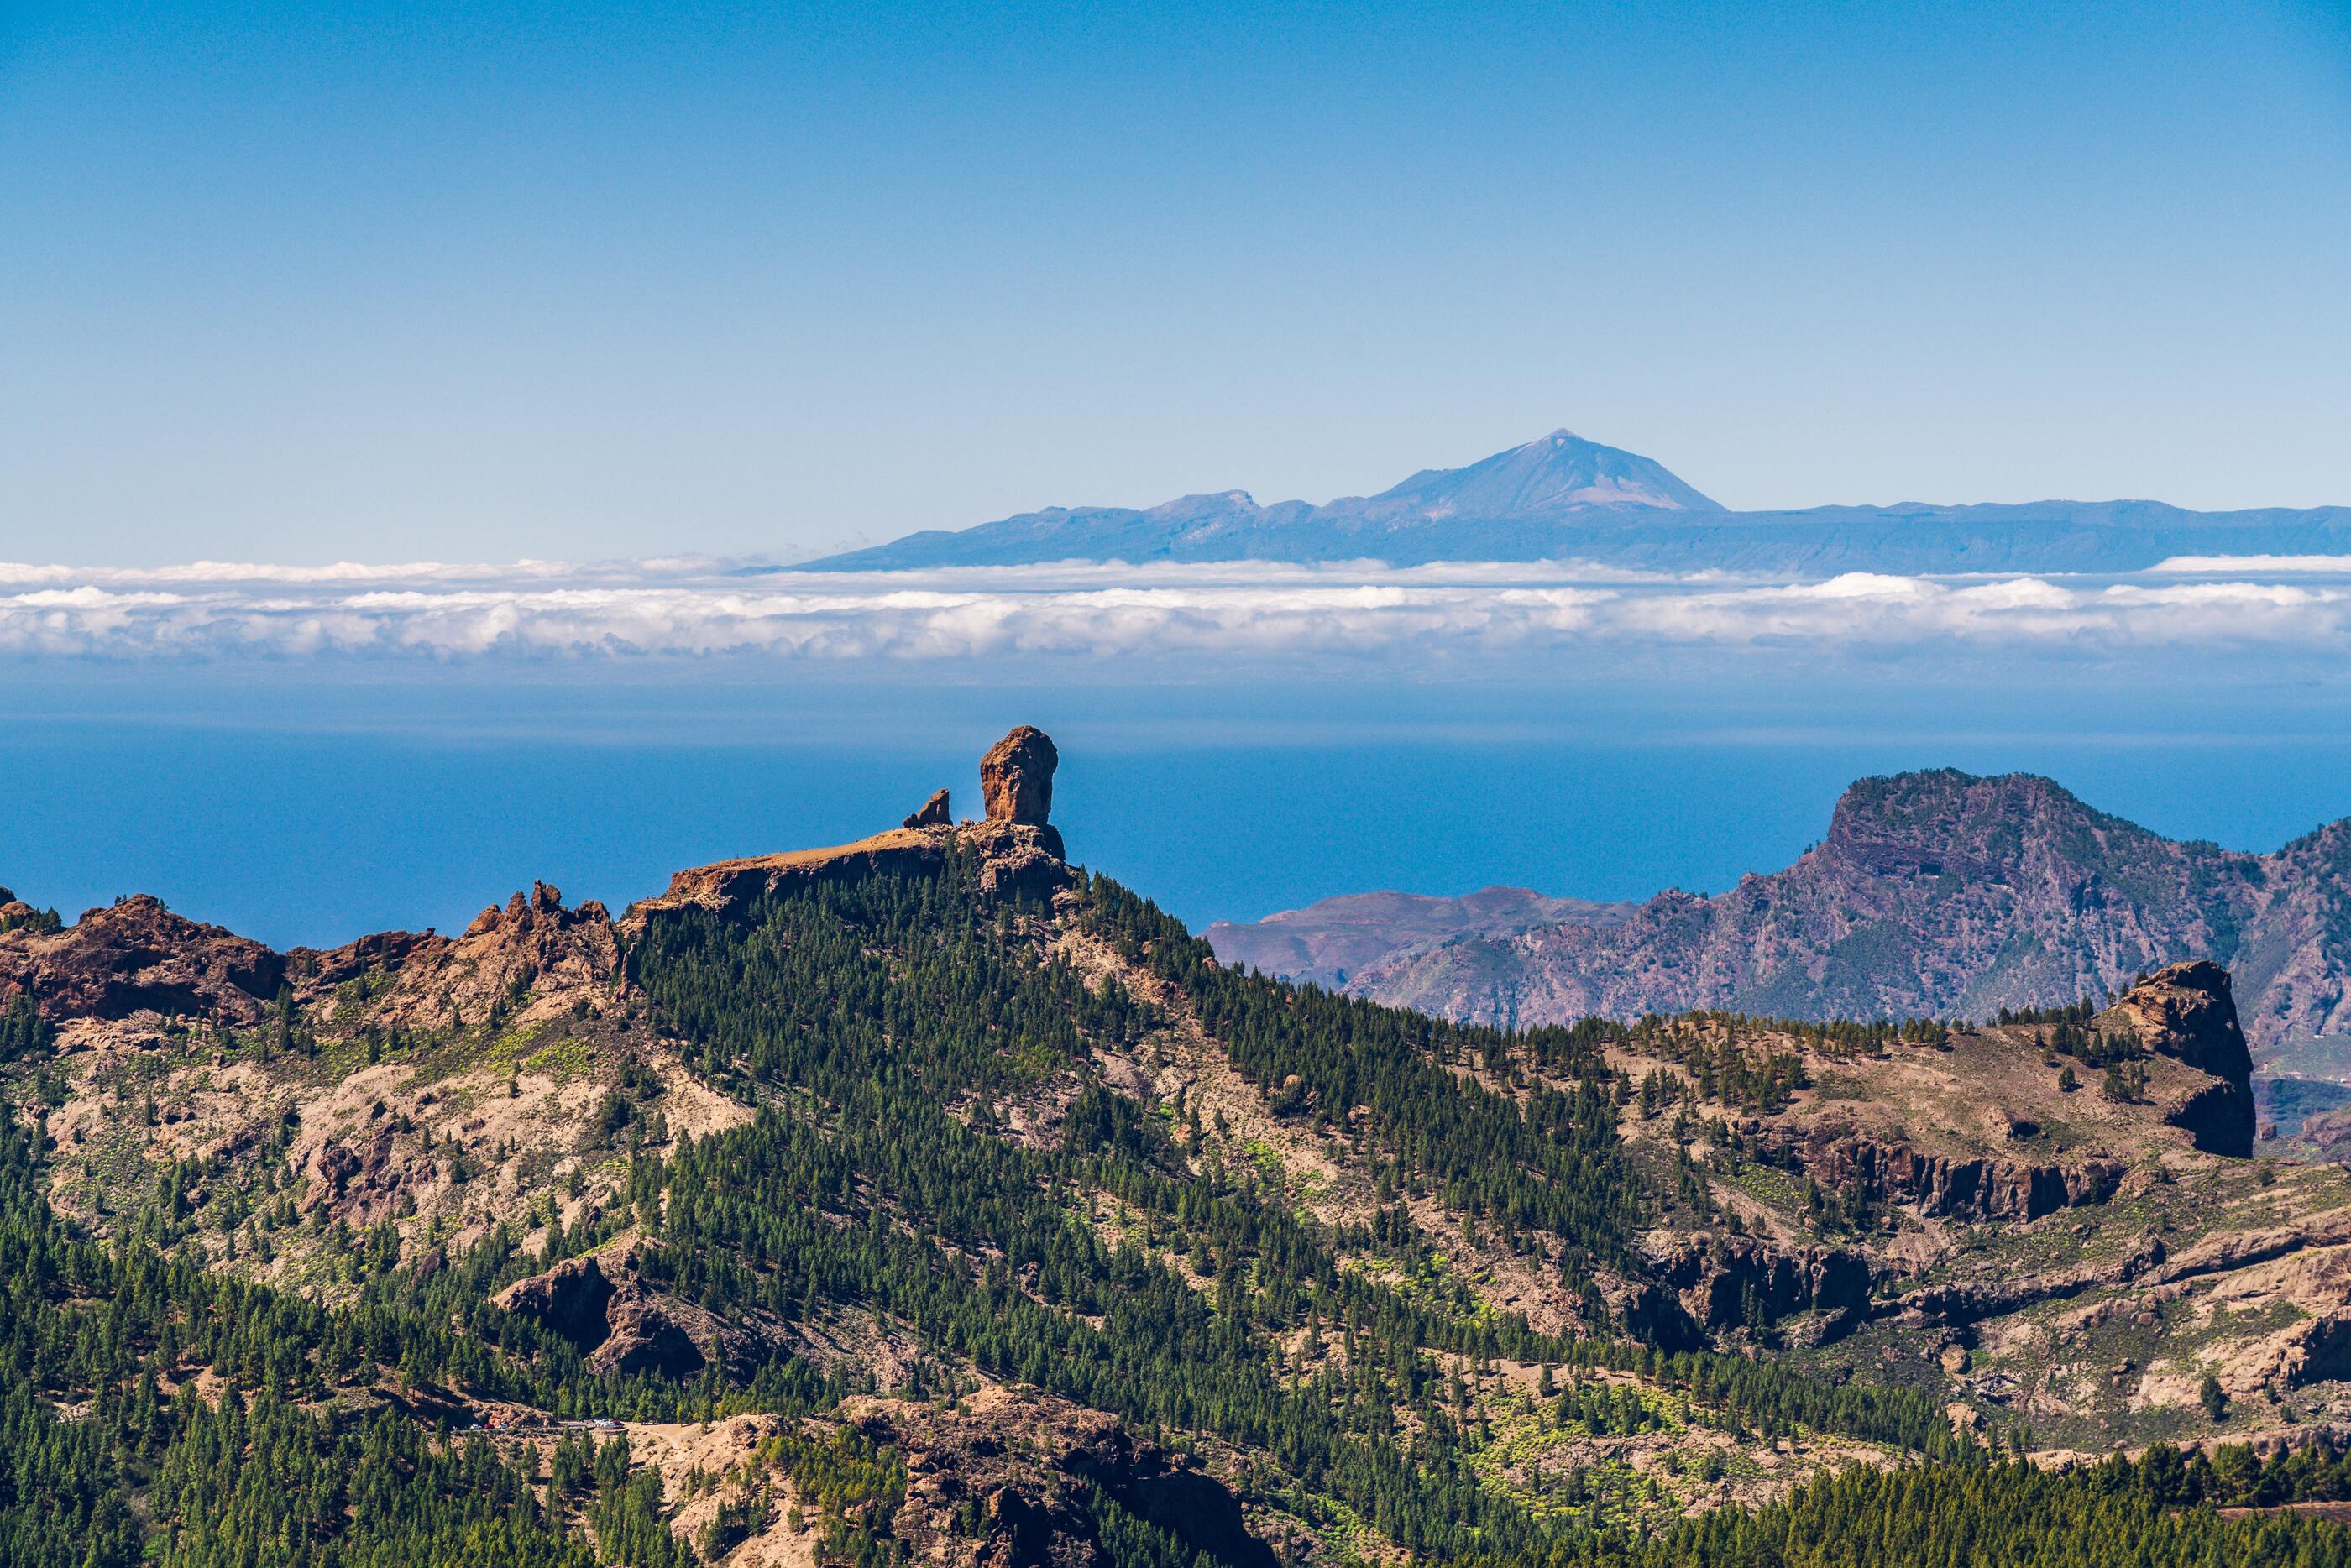 roque nublo mountain in gran canaria with the vulcano teide in the background